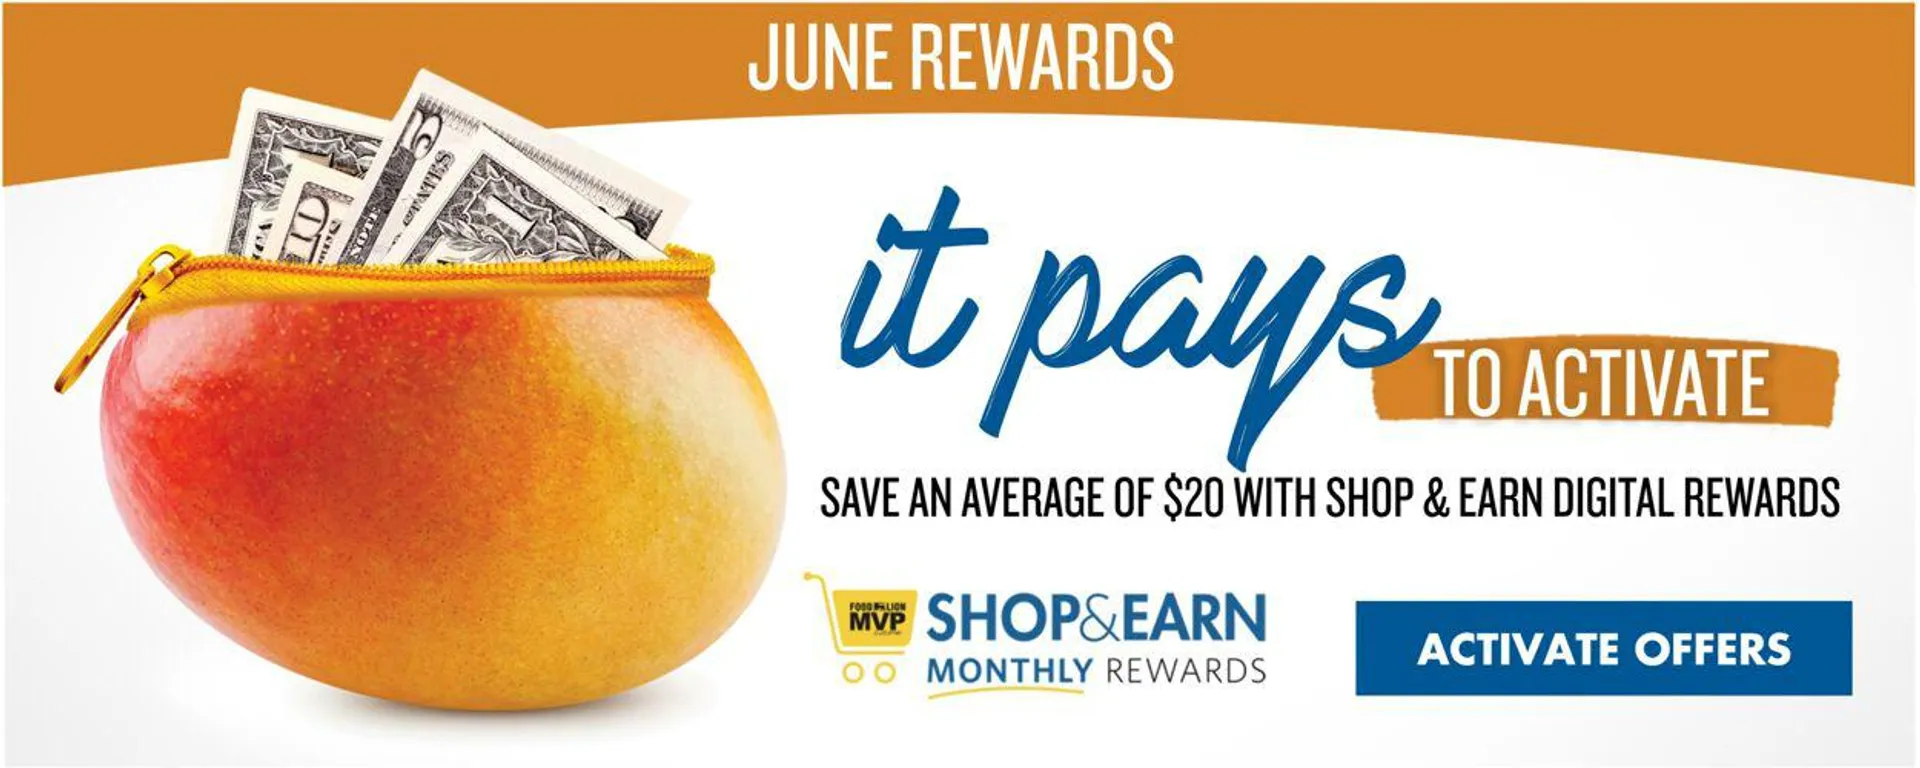 Food Lion Current weekly ad - 2